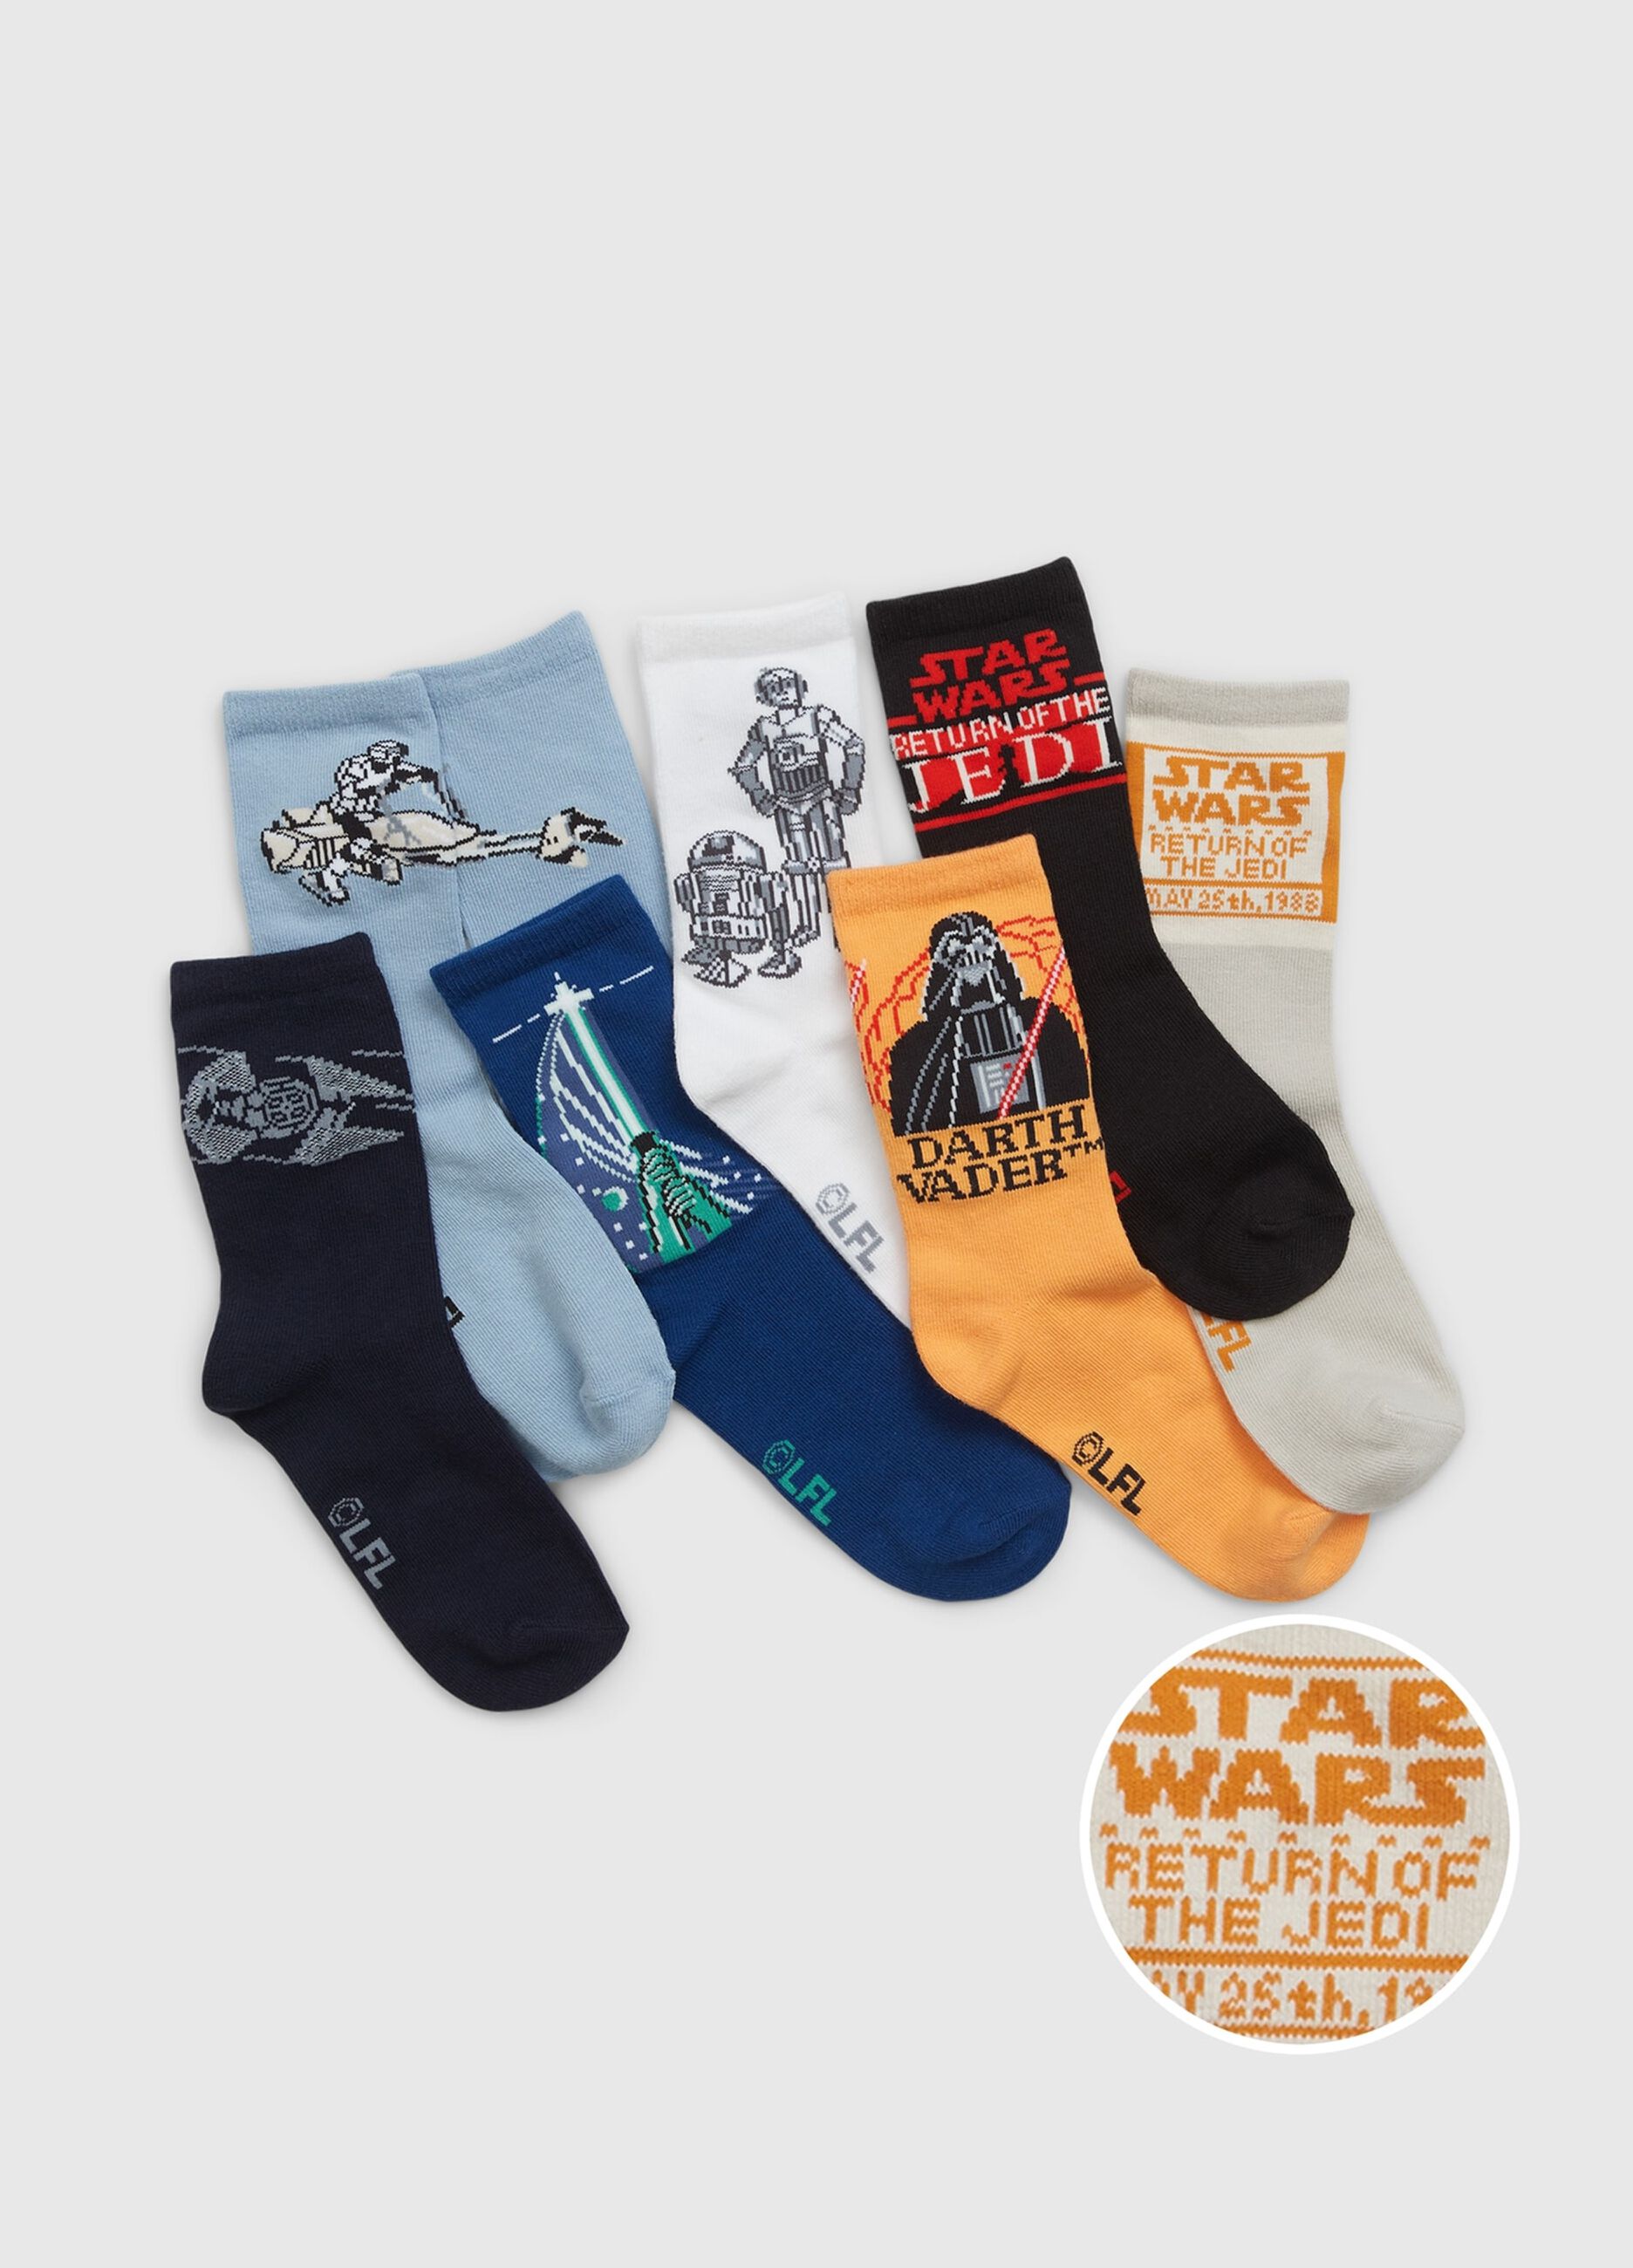 Seven-pair pack socks with Star Wars design